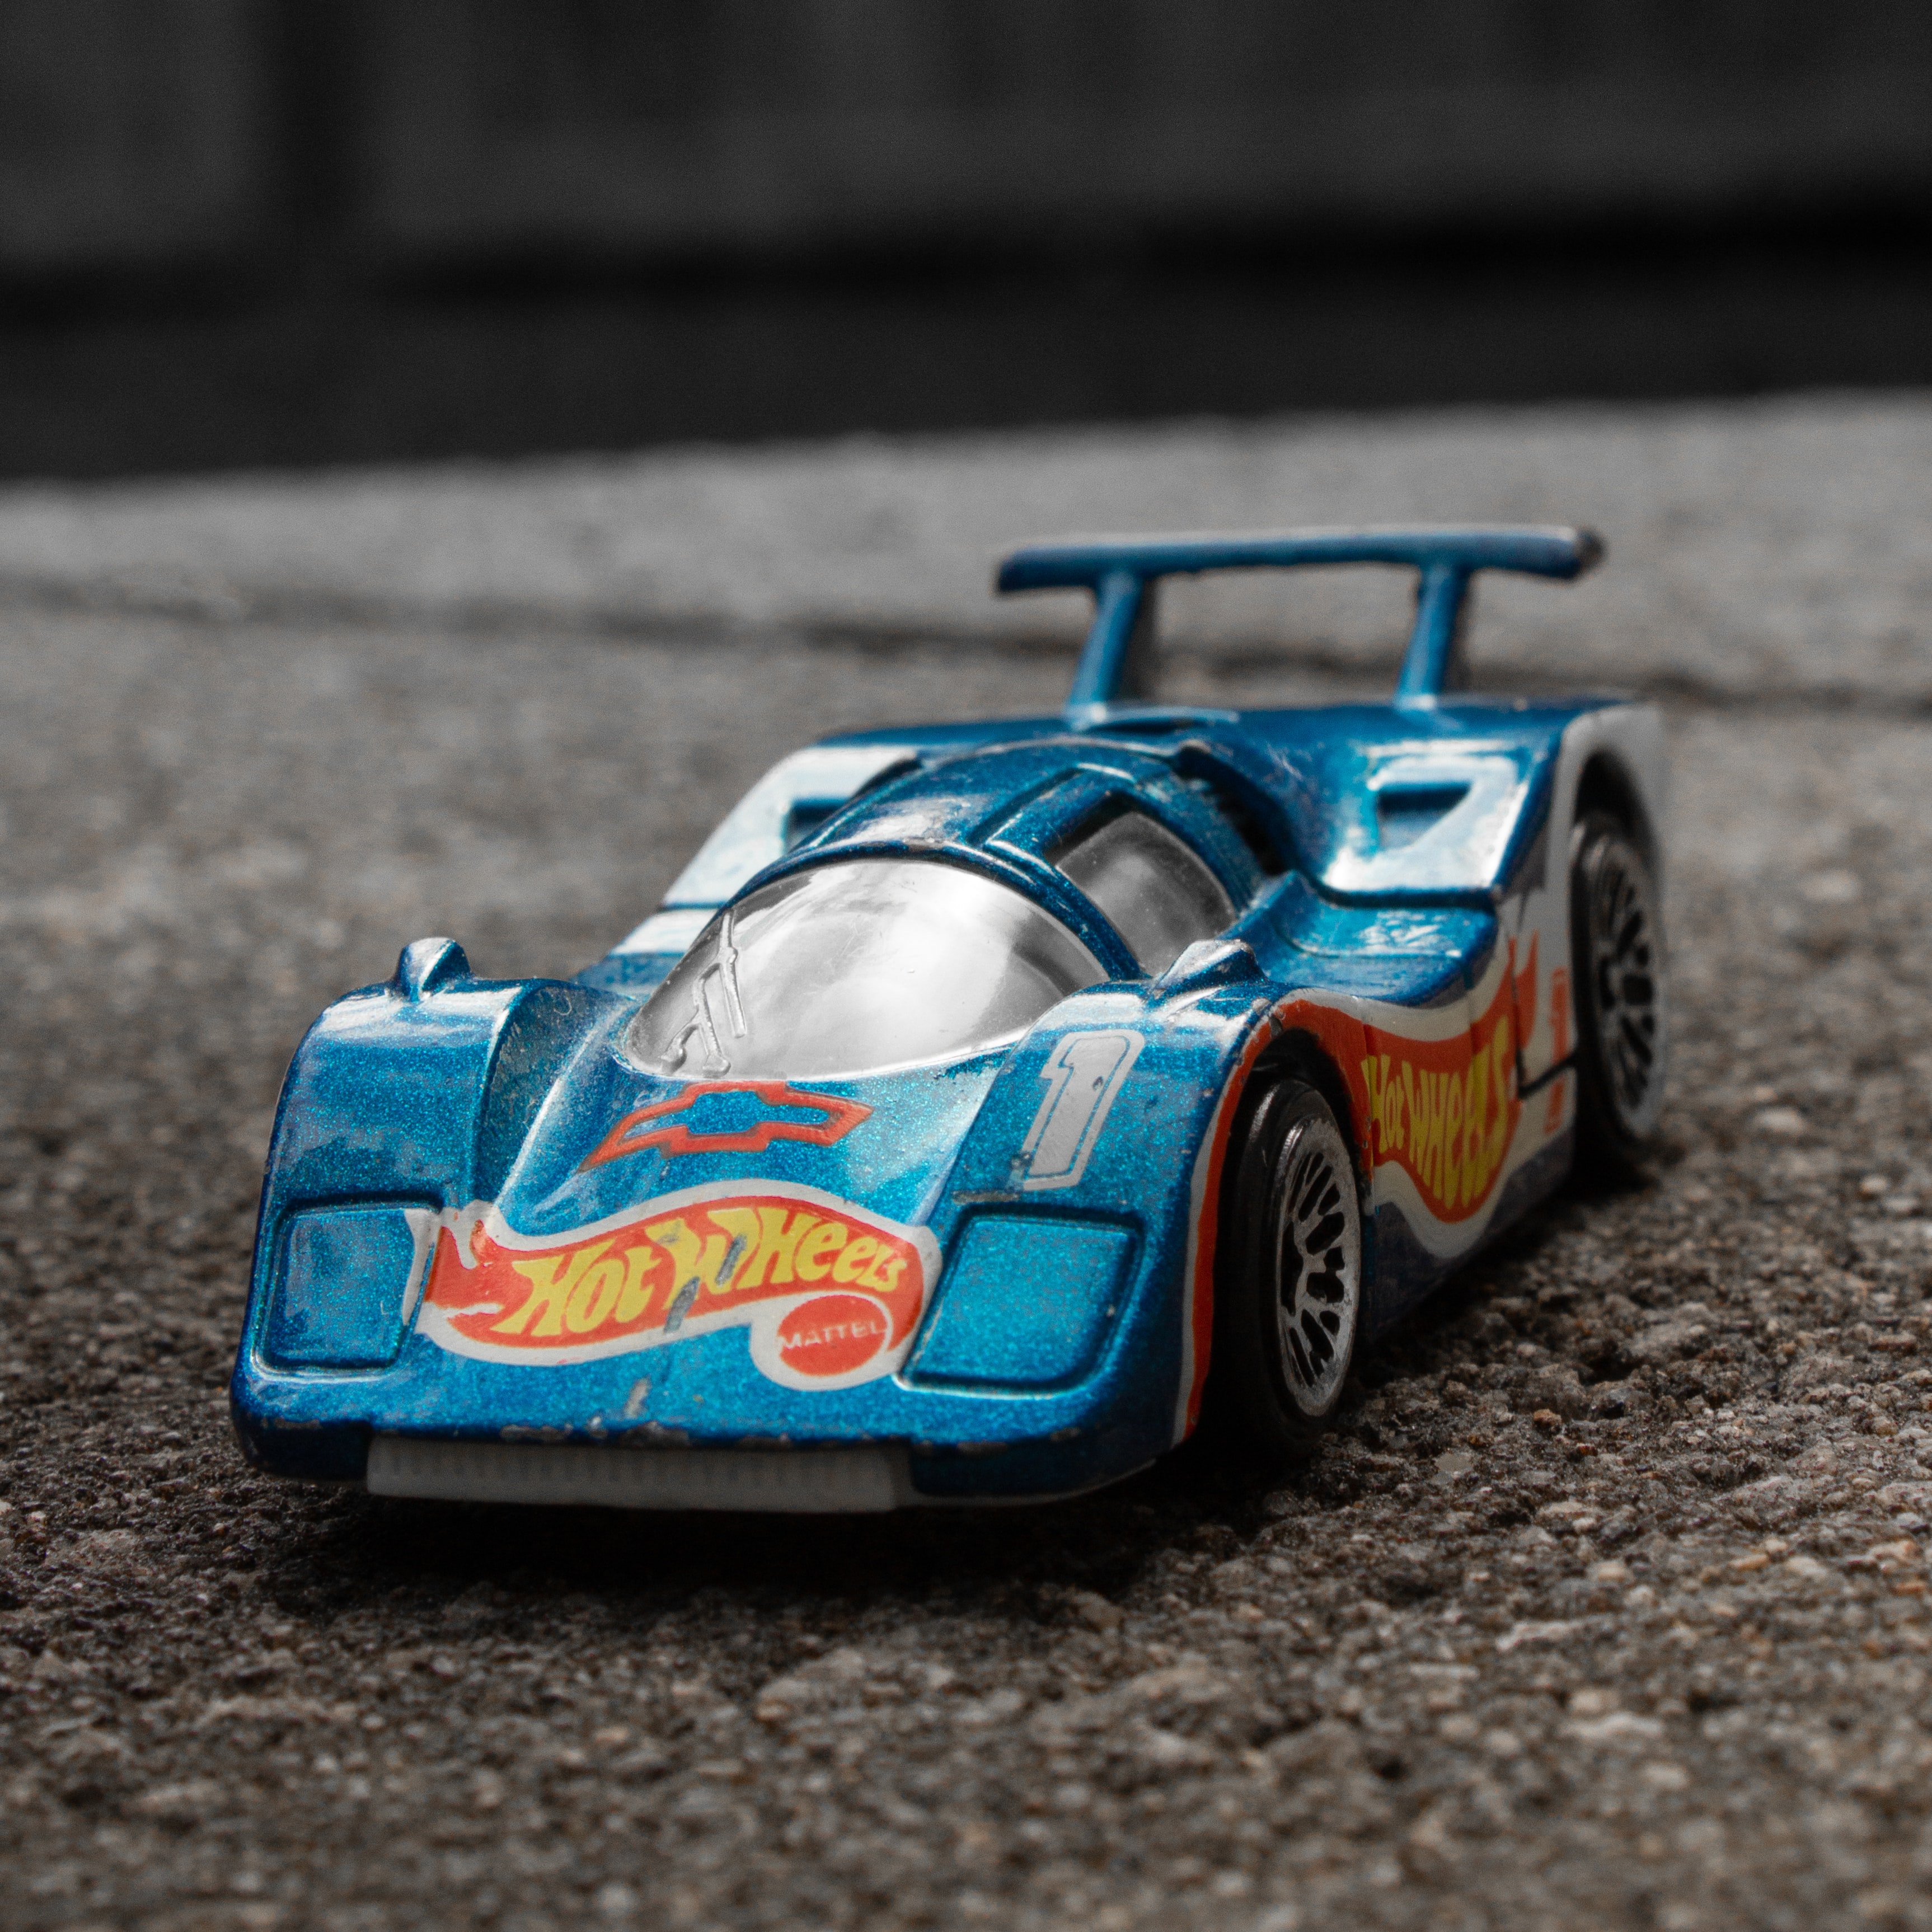 A car from Hot Wheels